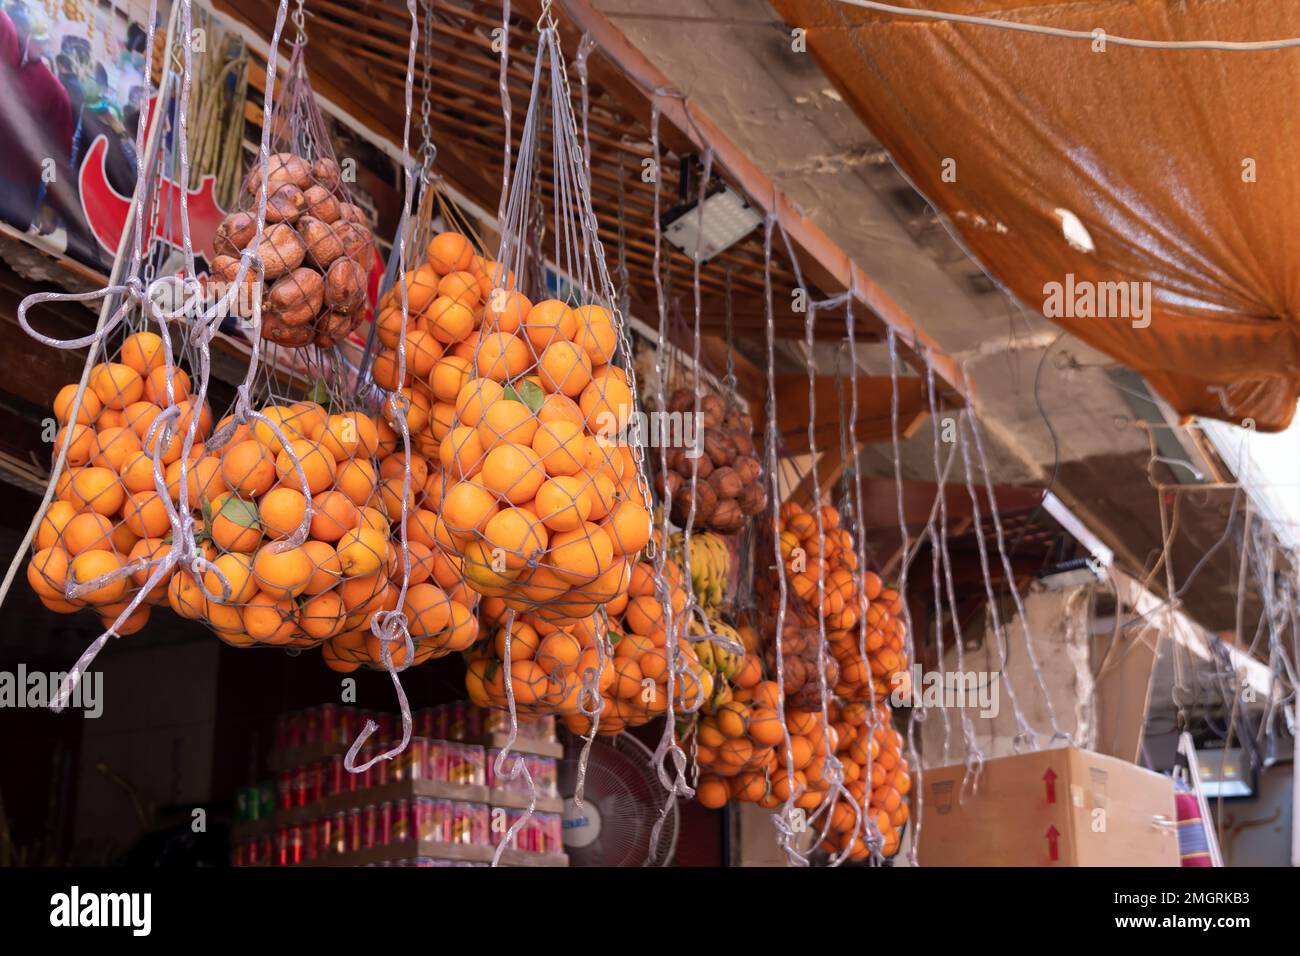 Natural oranges hanged in traditional street market in north Africa, poor country Stock Photo